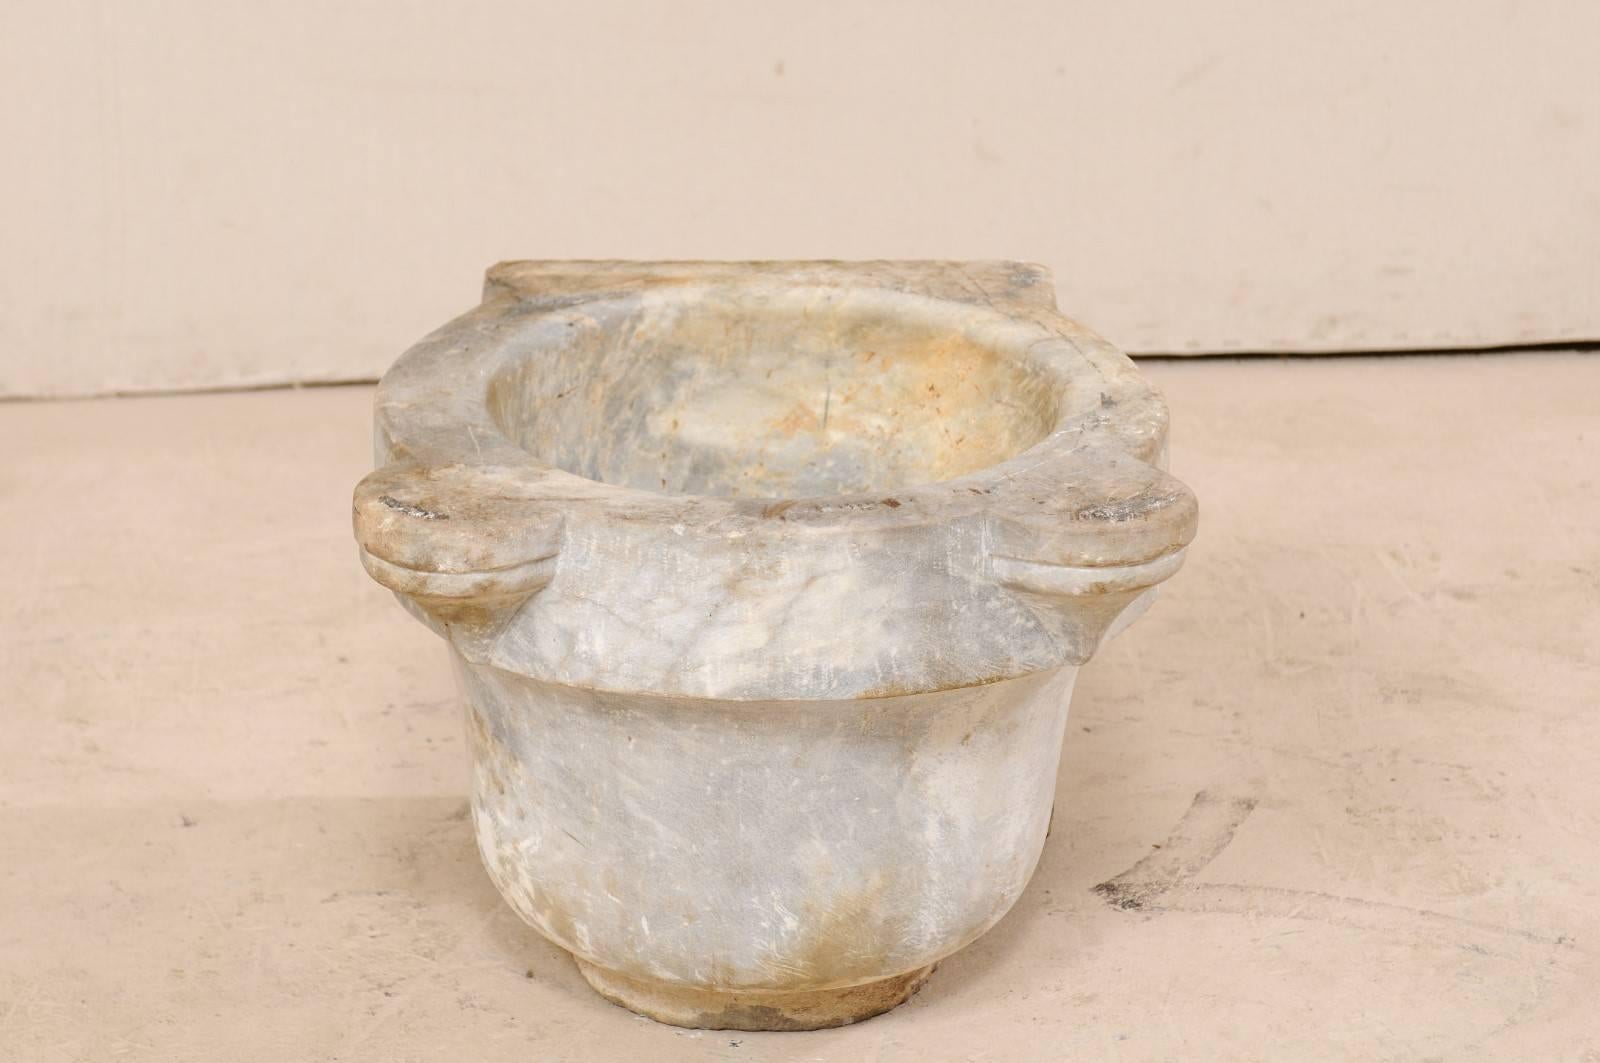 A Turkish hammam wash basin of marble from the 19th century. This antique hand-carved marble basin was once used within a Turkish bath house or hammam. The backside of the basin remains flat, allowing it to be placed flush against a wall. Aside from